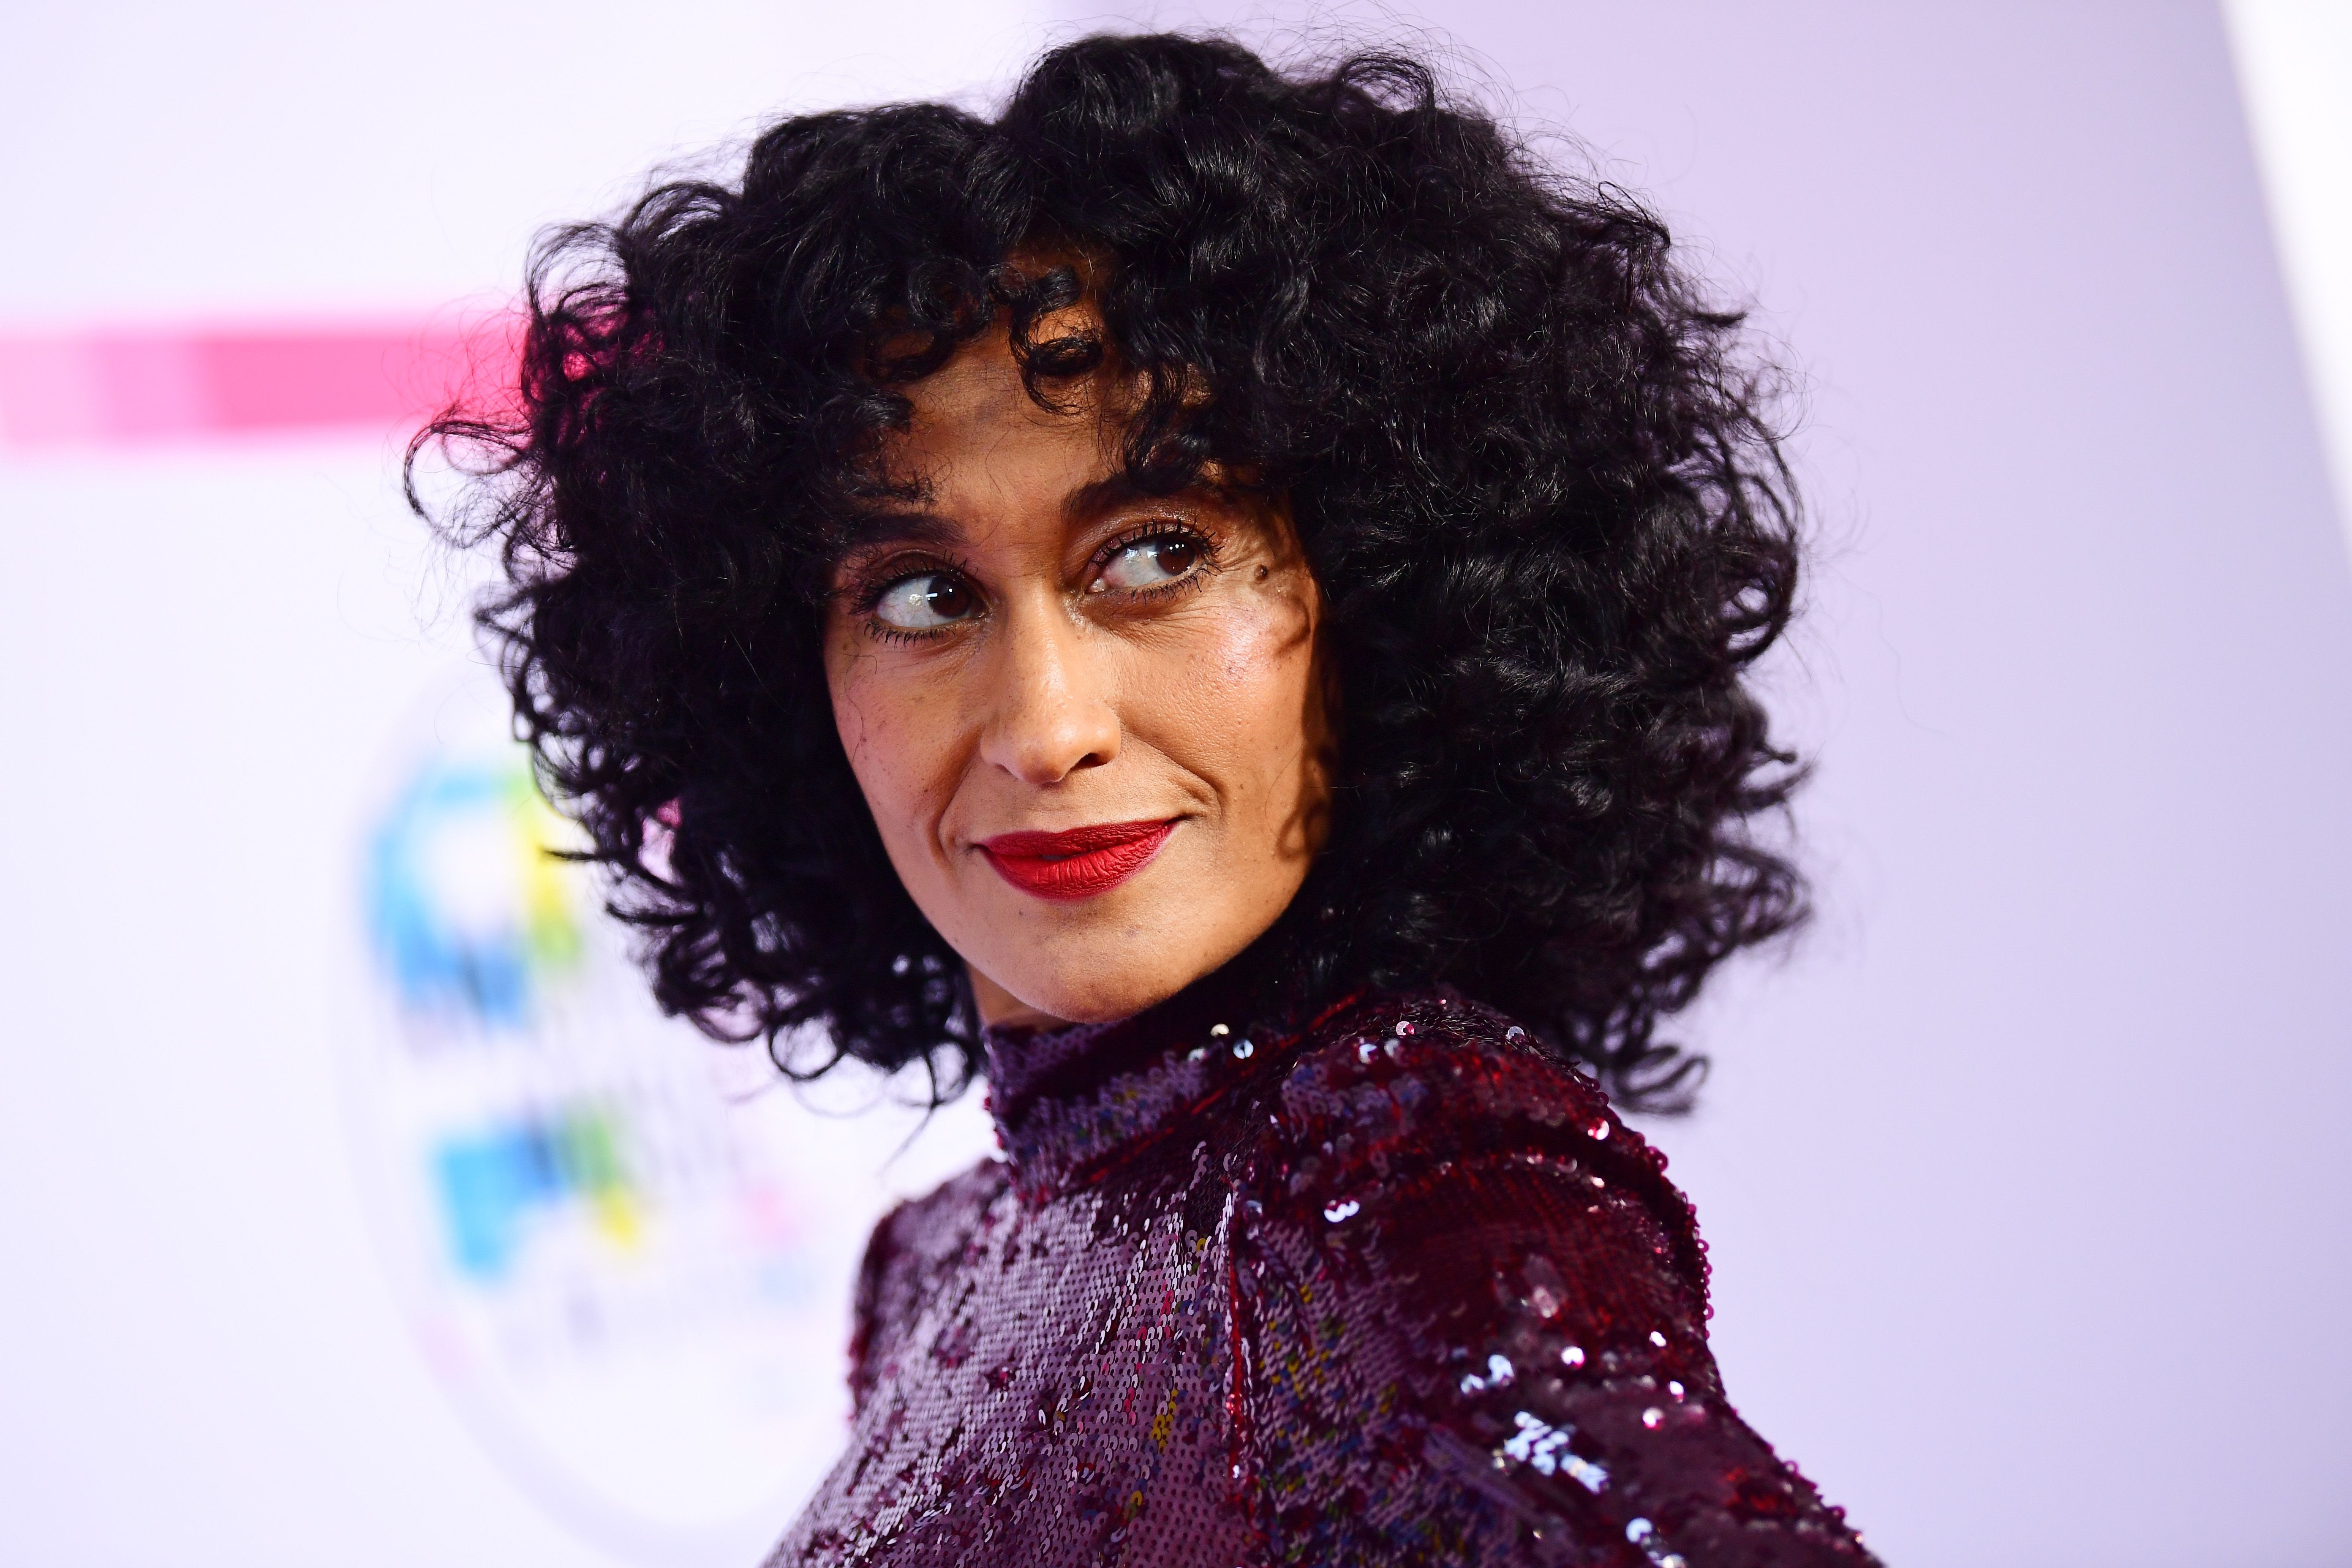 Tracee Ellis Ross at the 2017 American Music Awards at Microsoft Theater on November 19, 2017. | Photo: Getty Images